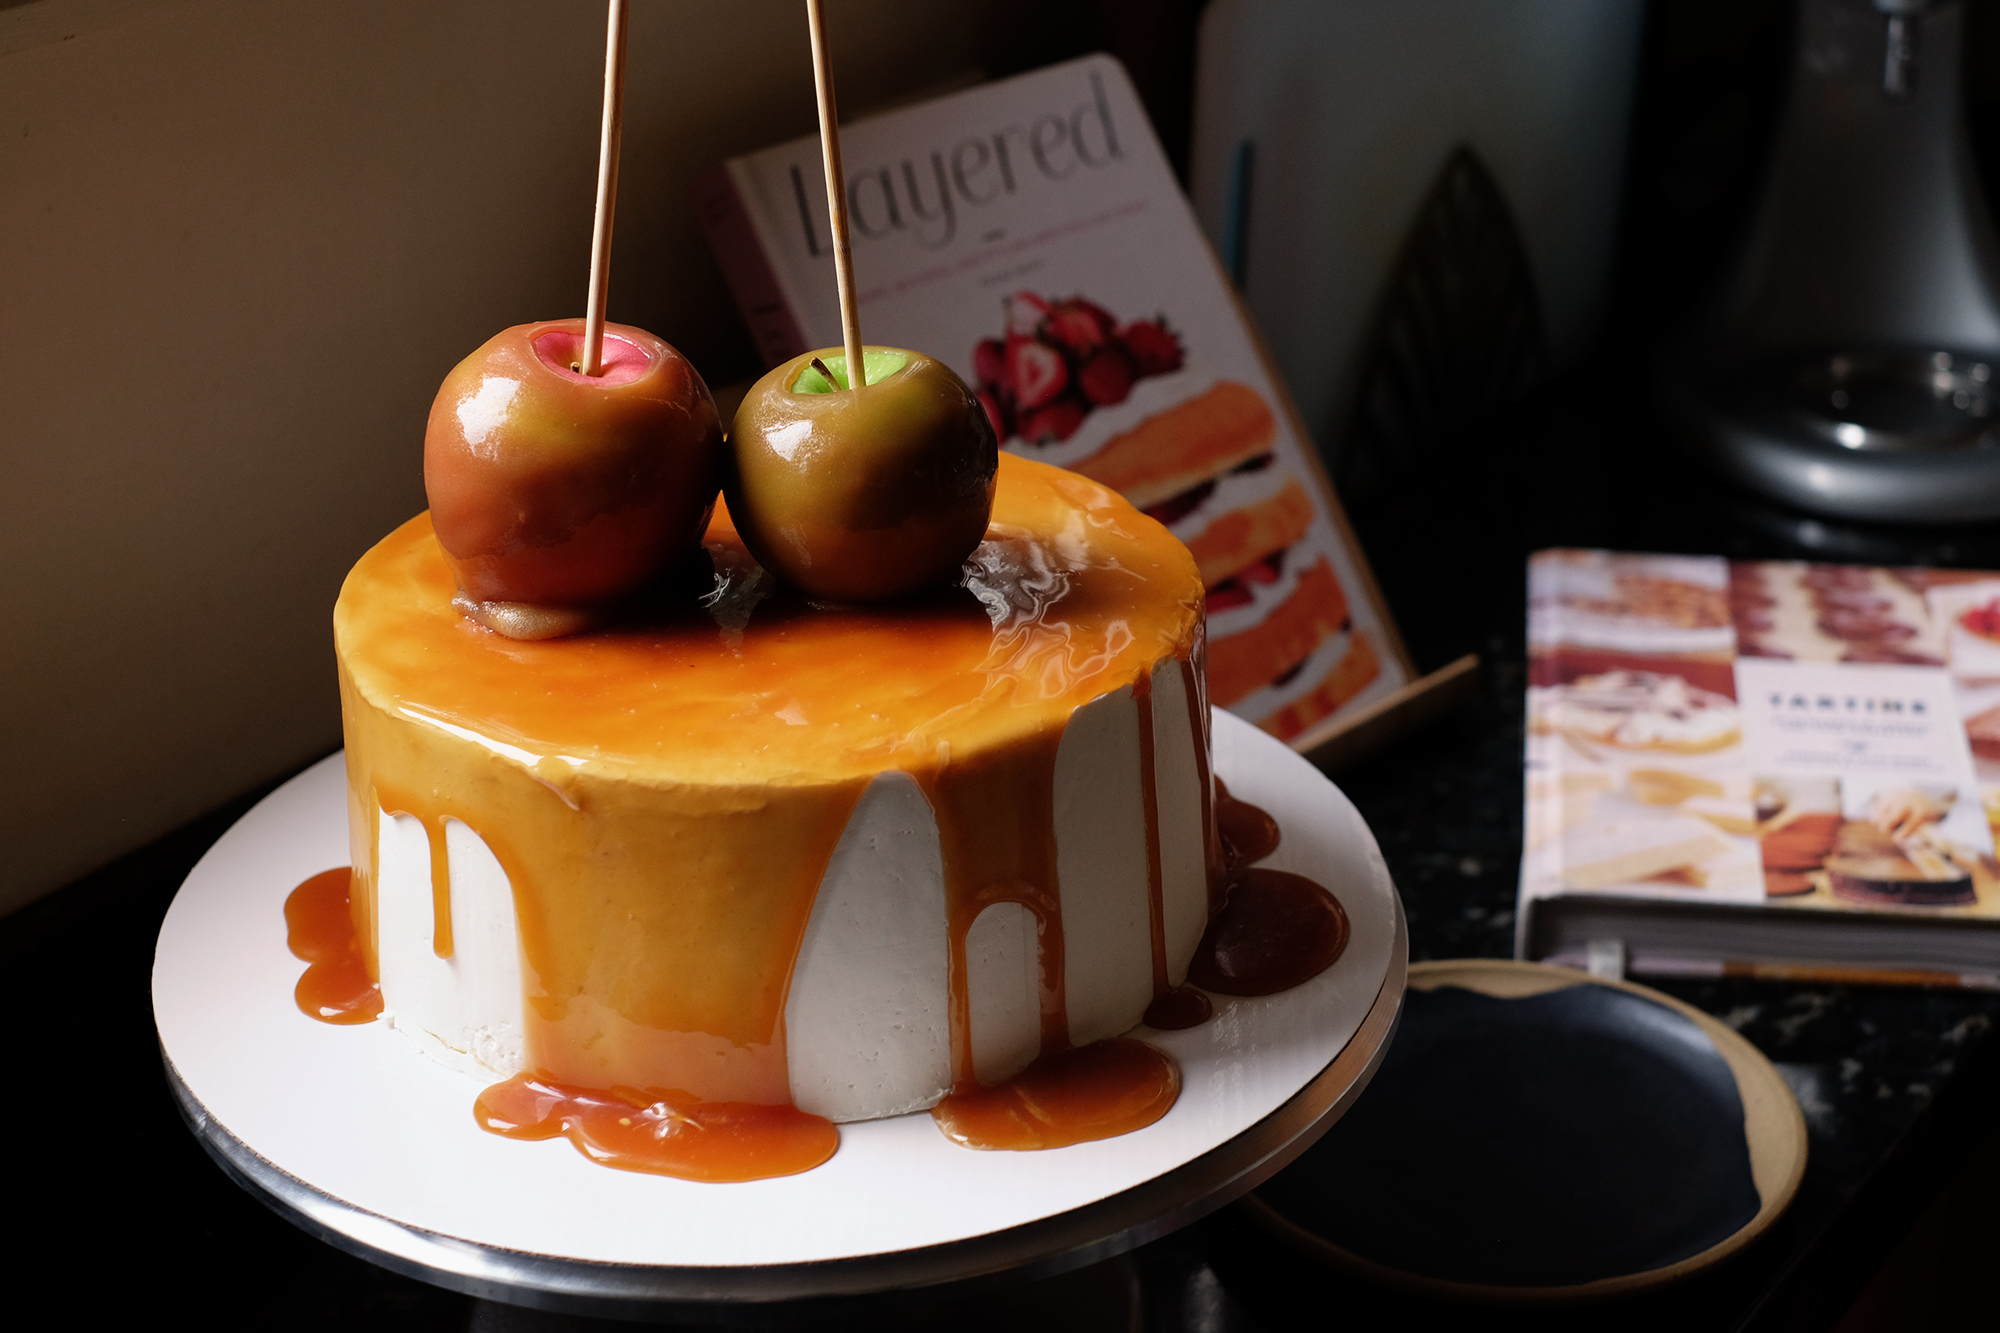 Spiced Toffee Apple Cake with Toffee Frosting – from the sweet kitchen